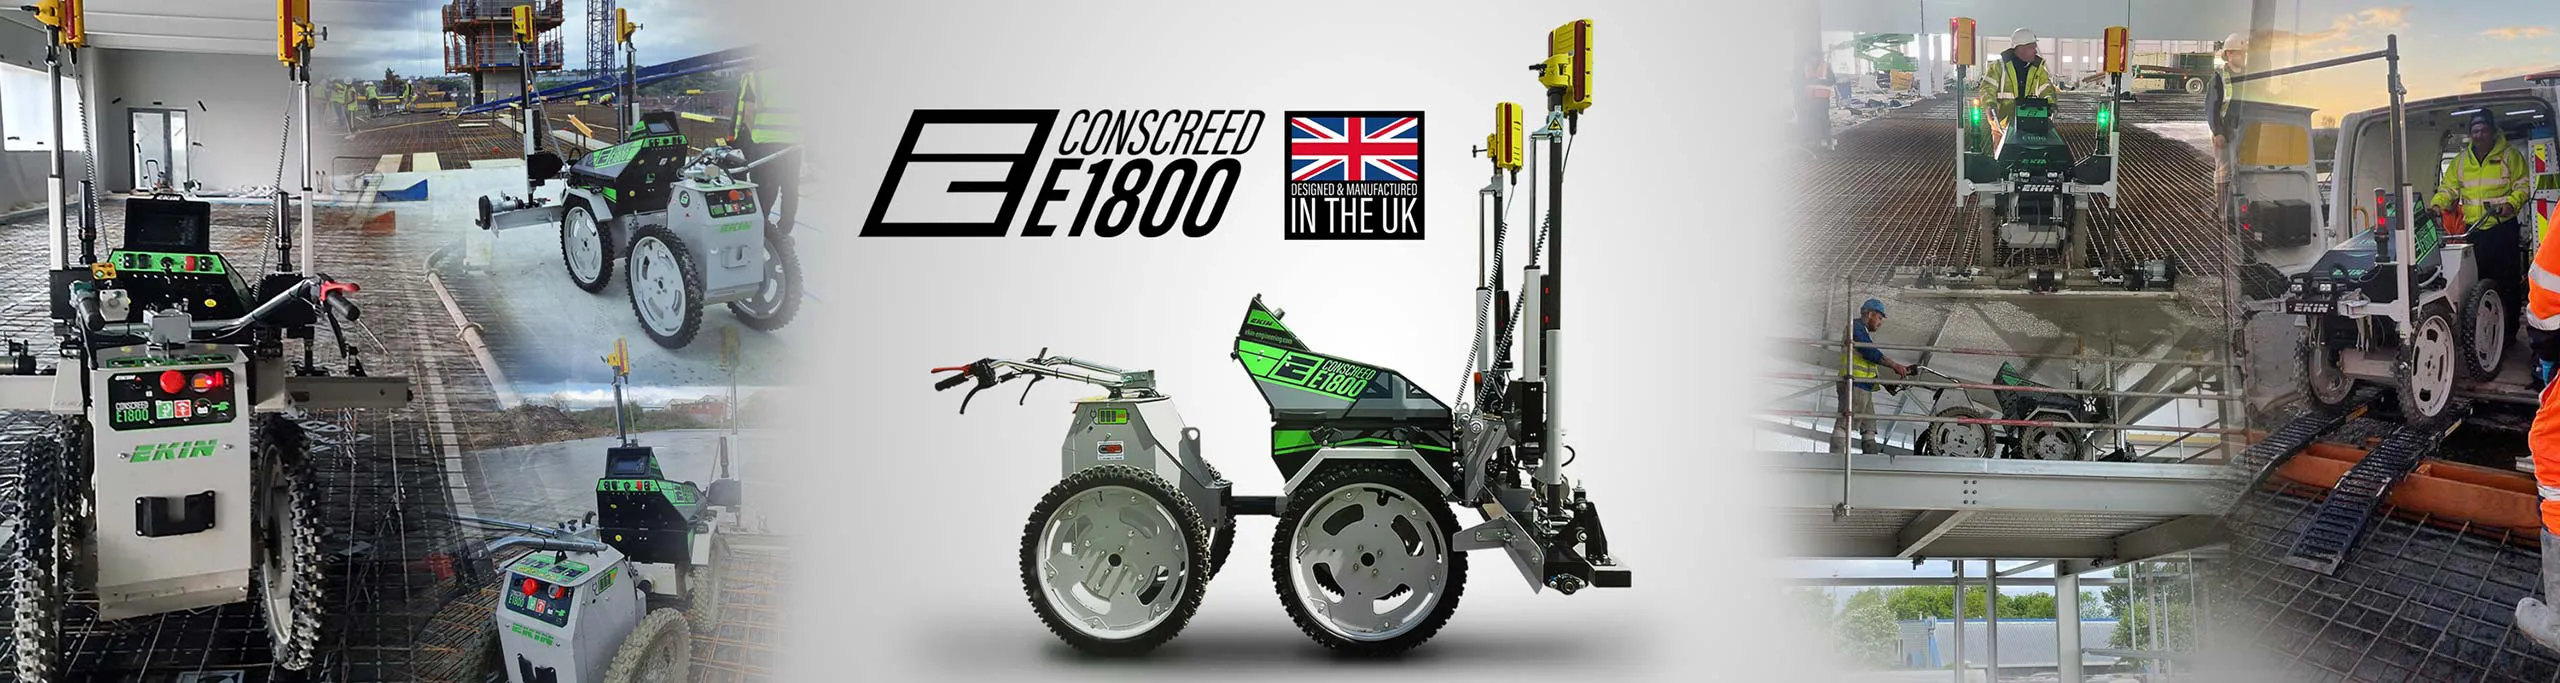 The Conscreed E1800 Laser Guided Concrete Screed